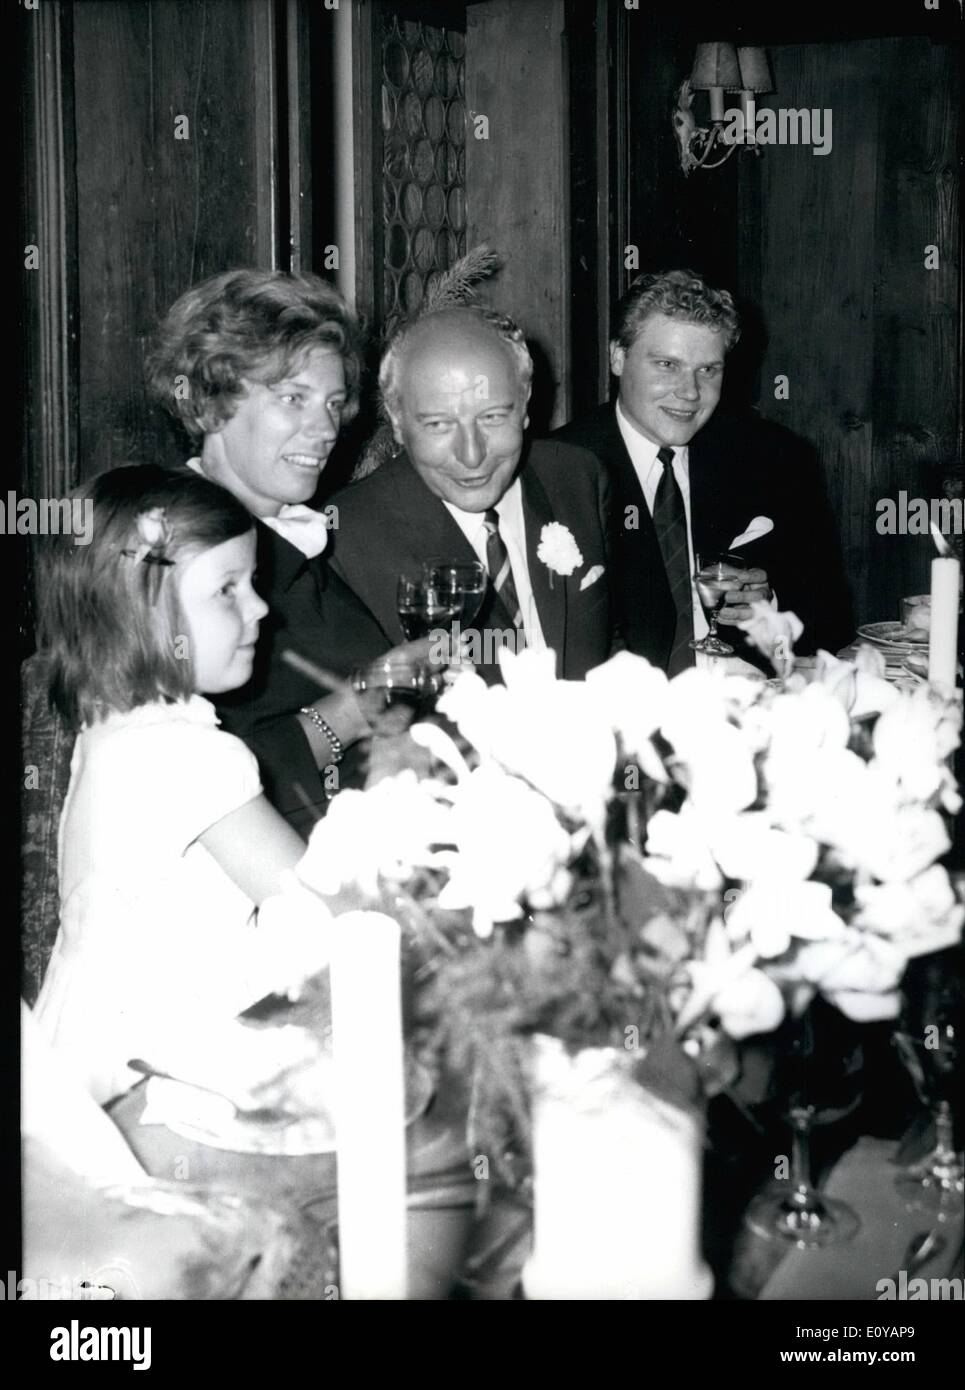 Jul. 07, 1969 - Walter Scheel as seen after his wedding (second marriage) in Munich. Scheel is the FDP chairman. Pictured from left to right: Cornelia (his new step-daughter) Mildred Scheel, his new bride Scheel's son from his previous marriage. Cronstadt Naval Officers Stock Photo